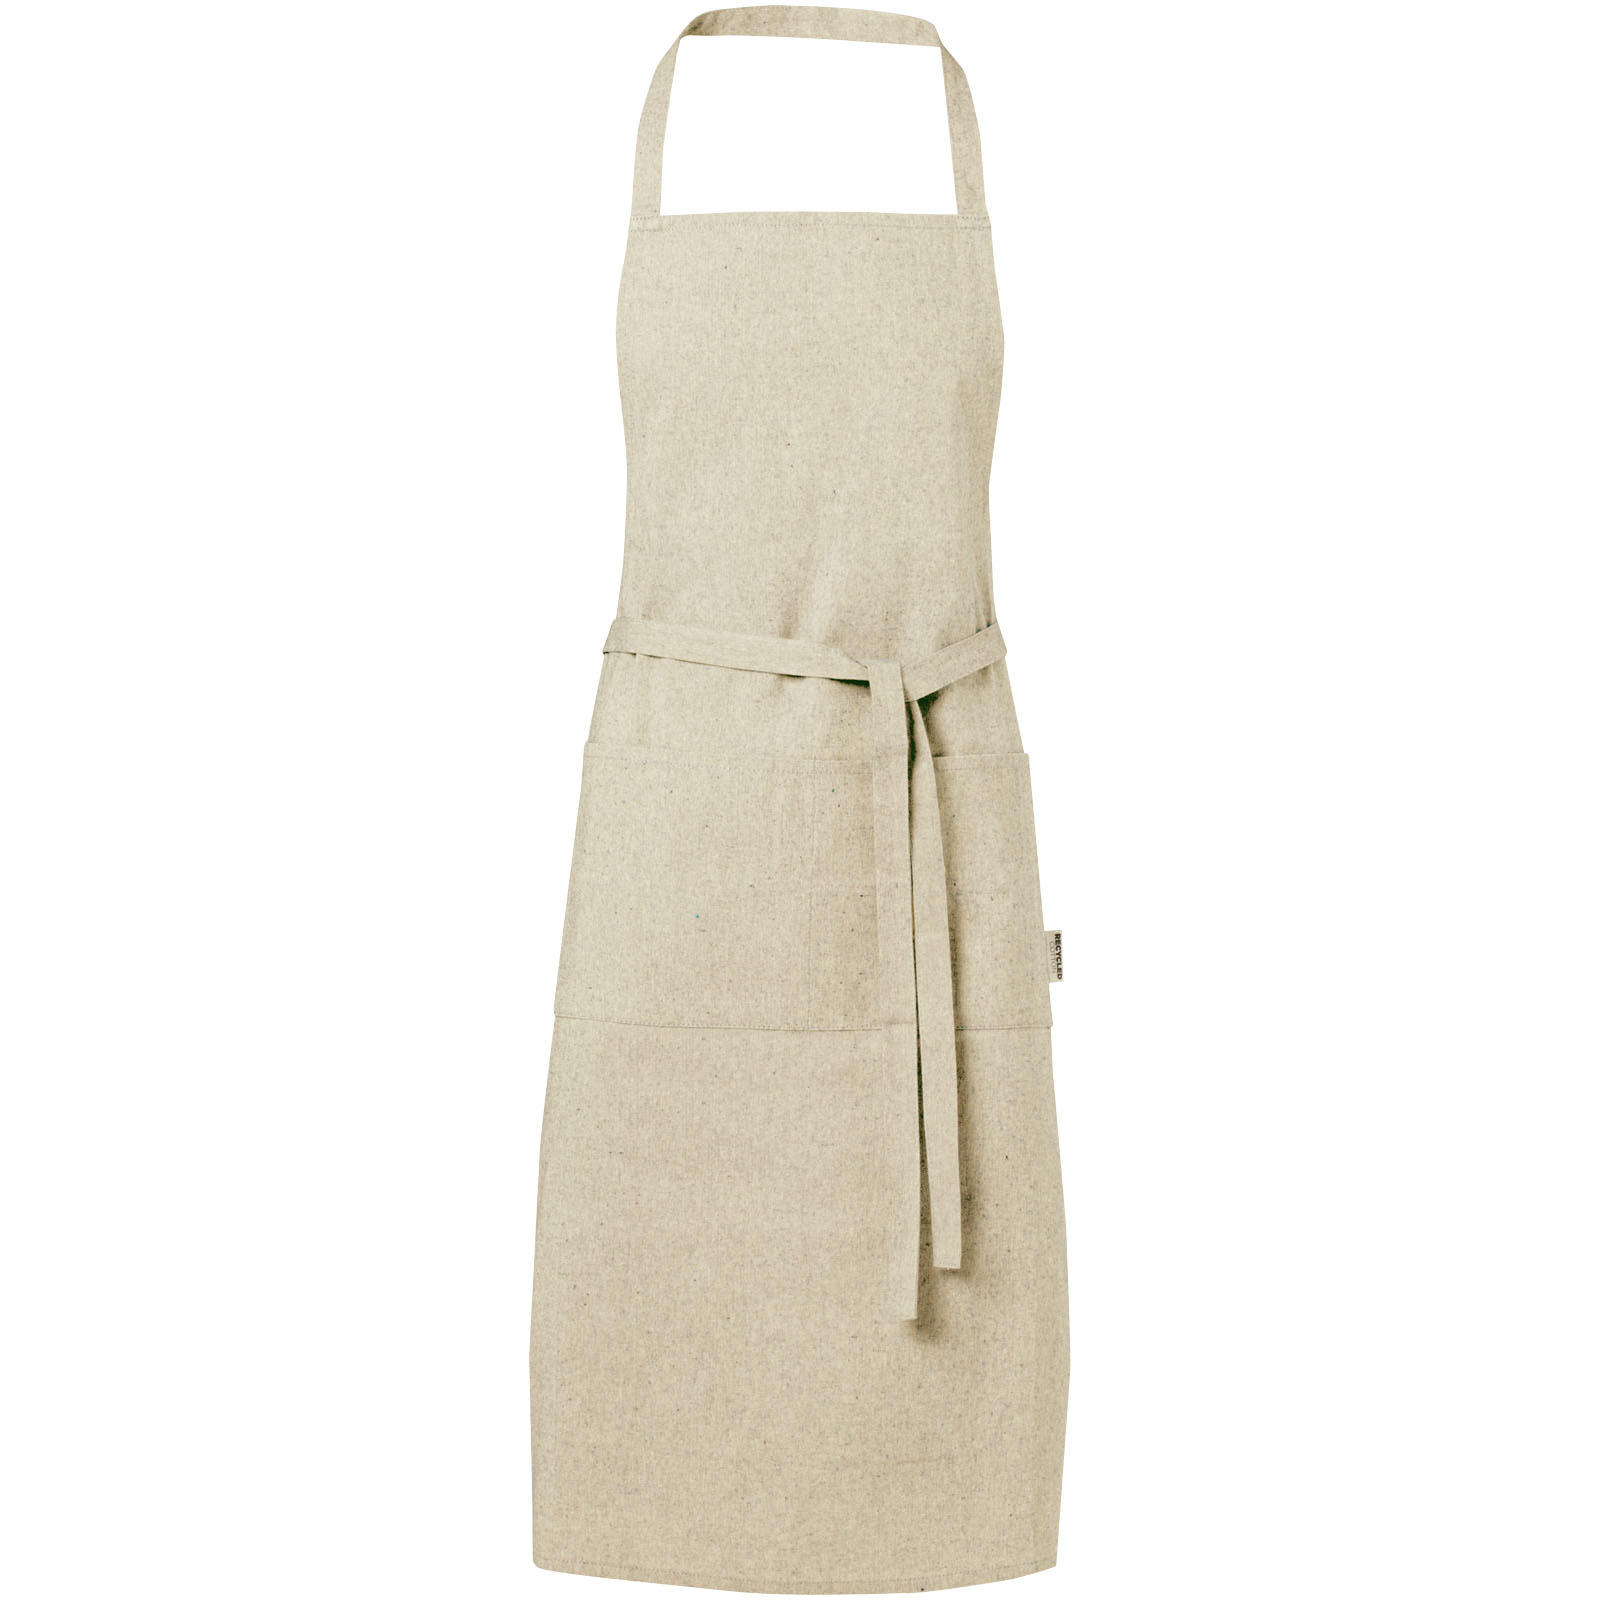 Advertising Aprons - Pheebs 200 g/m² recycled cotton apron - 0